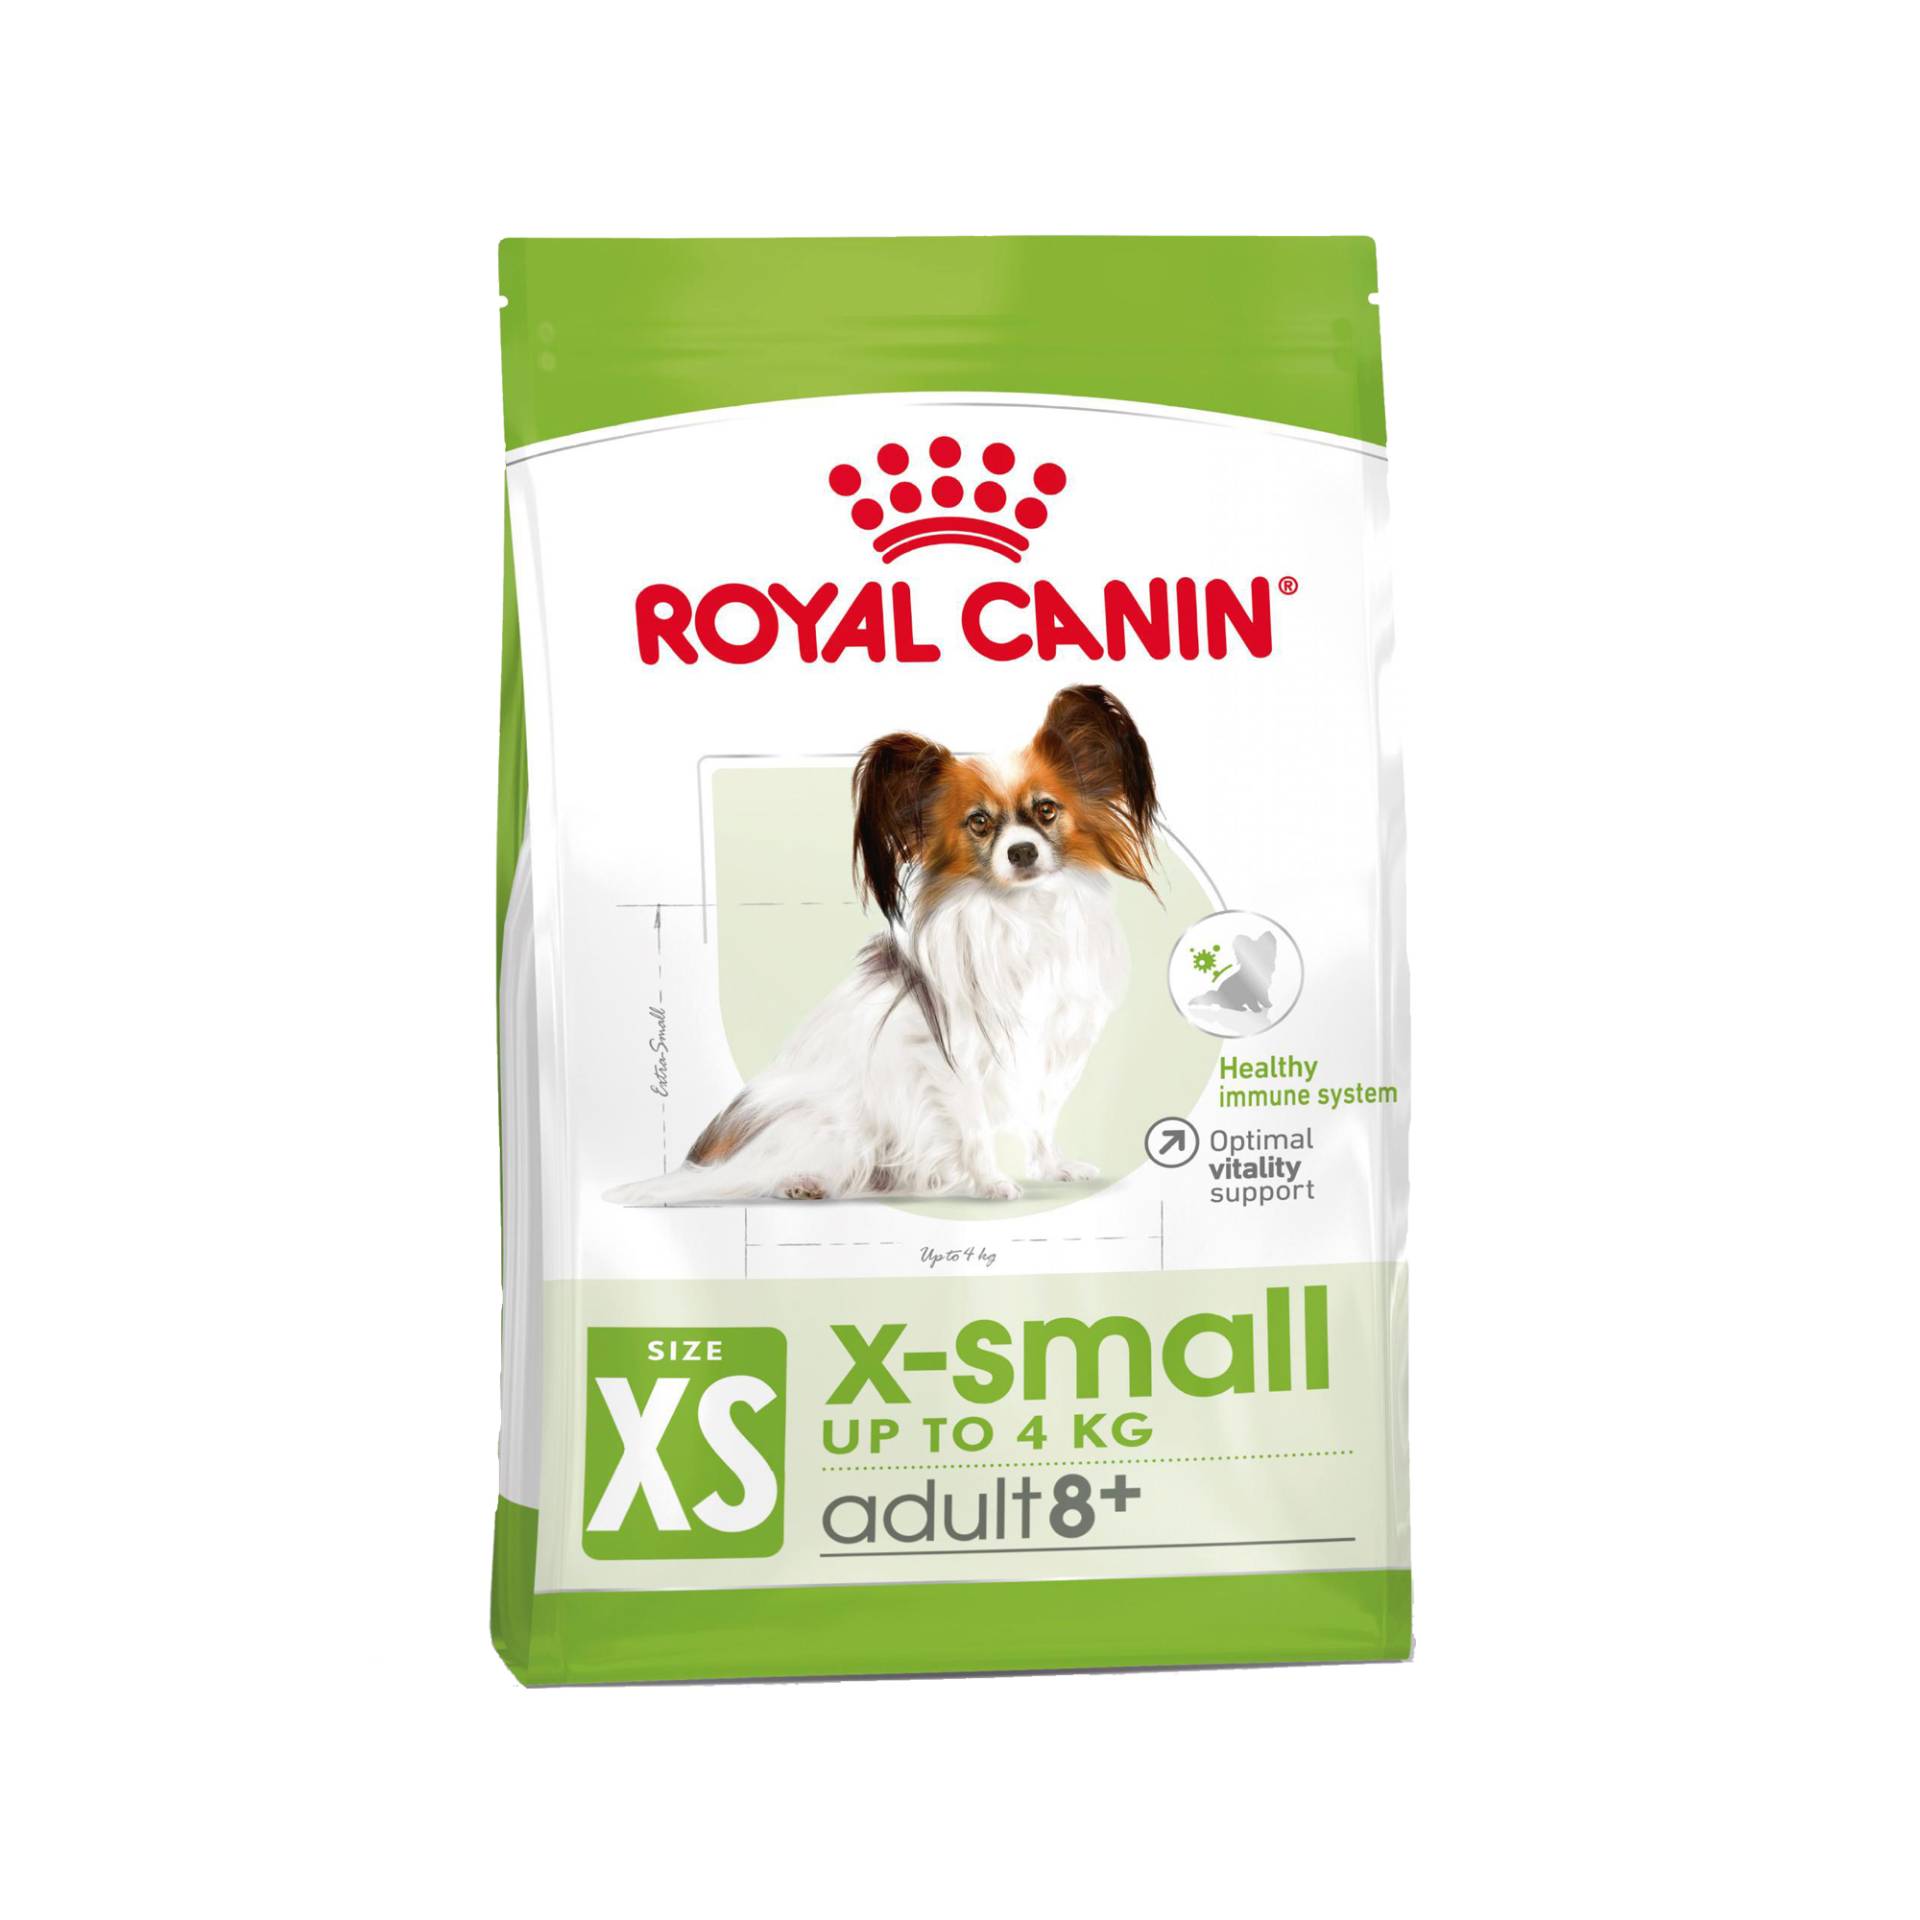 Royal Canin X-Small Adult 8+ - 500 g von Royal Canin